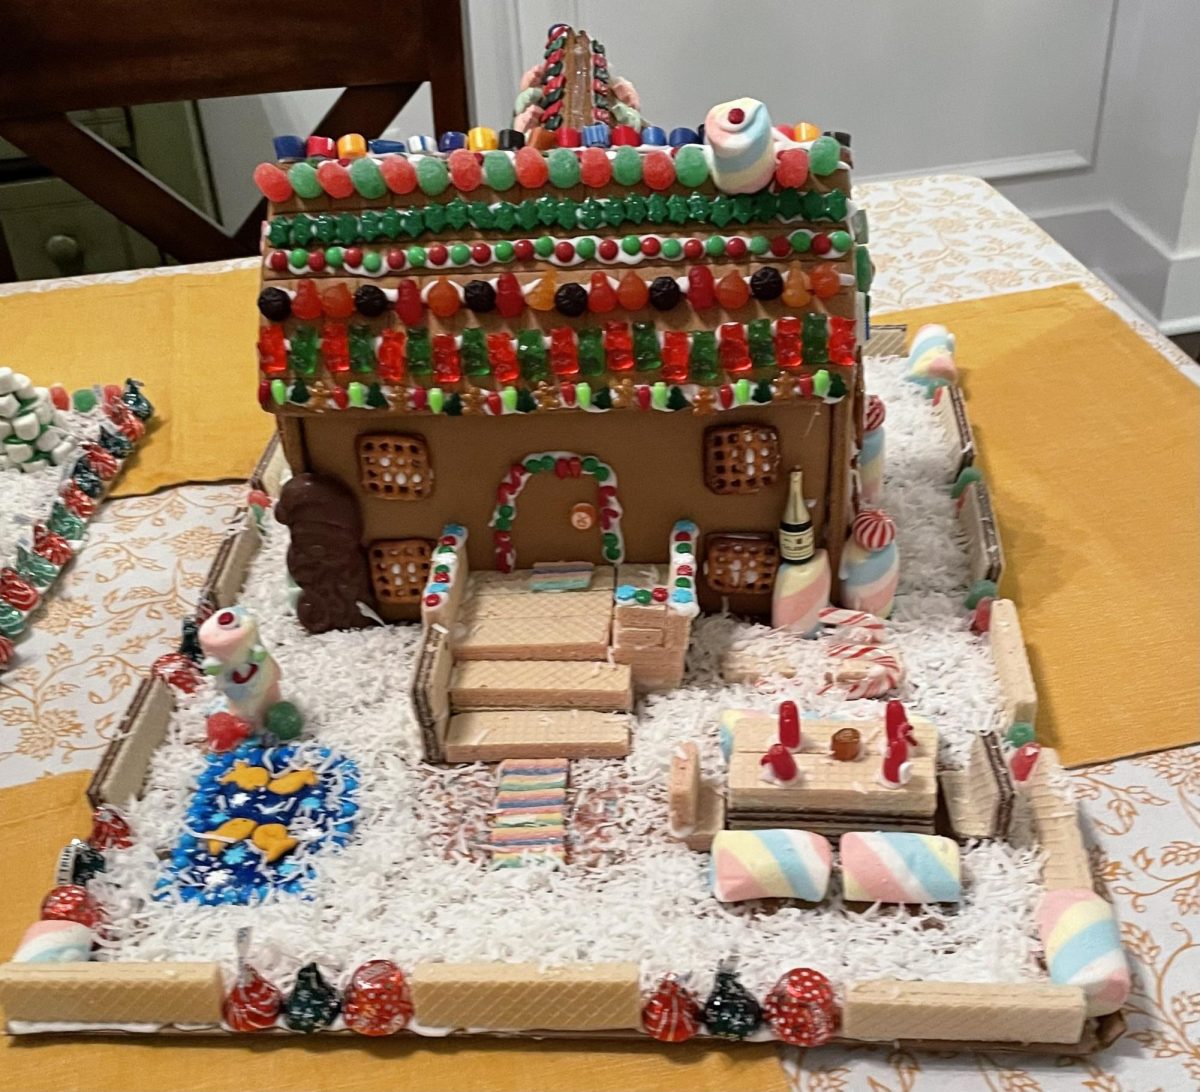 In 2021, I created a mansion gingerbread house that I decorated with wafers, pretzels, M&Ms, skittles and marshmallows. One of the spaces of the house that I enjoy decorating is the yard. For example, I added a pond to the yard which was made from wafers and marshmallows and a wafer fence to the backyard of my house. 